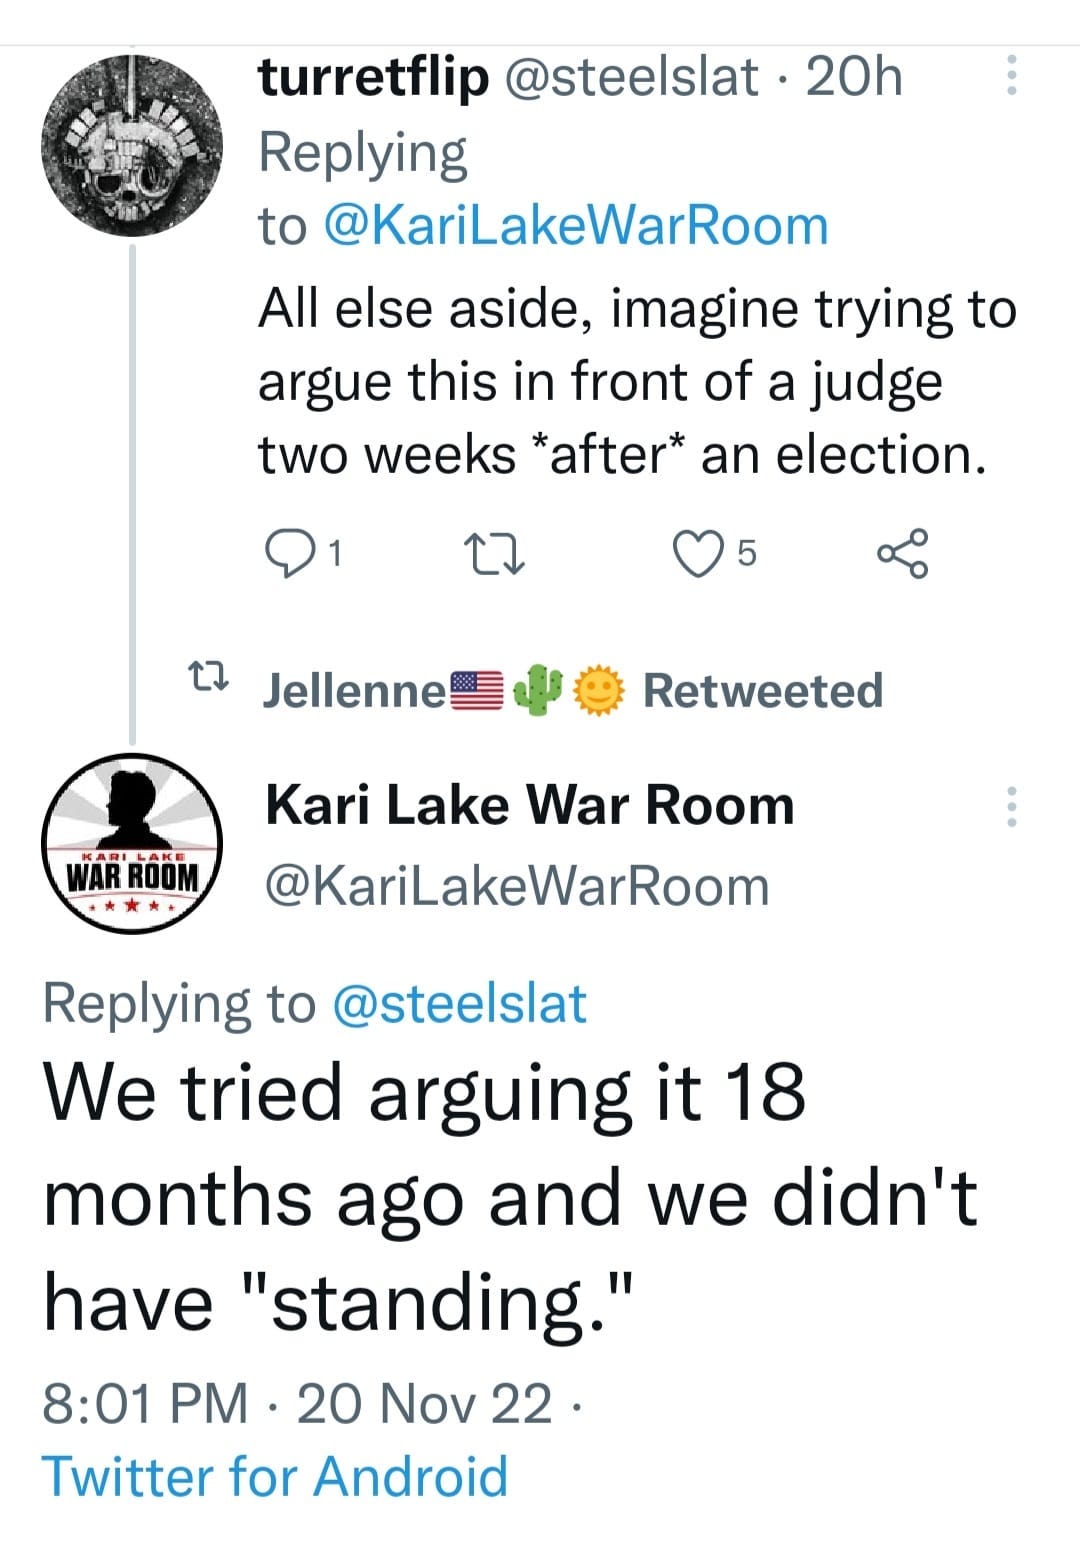 May be a Twitter screenshot of text that says 'turretflip @steelslat 20h Replying to @KariLakeWarRoom All else aside, imagine trying to argue this in front of a judge two weeks *after* an election. 5 1 Jellenne Retweeted ROUM Kari Lake War Room @KariLakeWarRoom Replying to @steelslat We tried arguing it 18 months ago and we didn't have "standing." 8:01 PM 20 Nov 22. Twitter for Android'